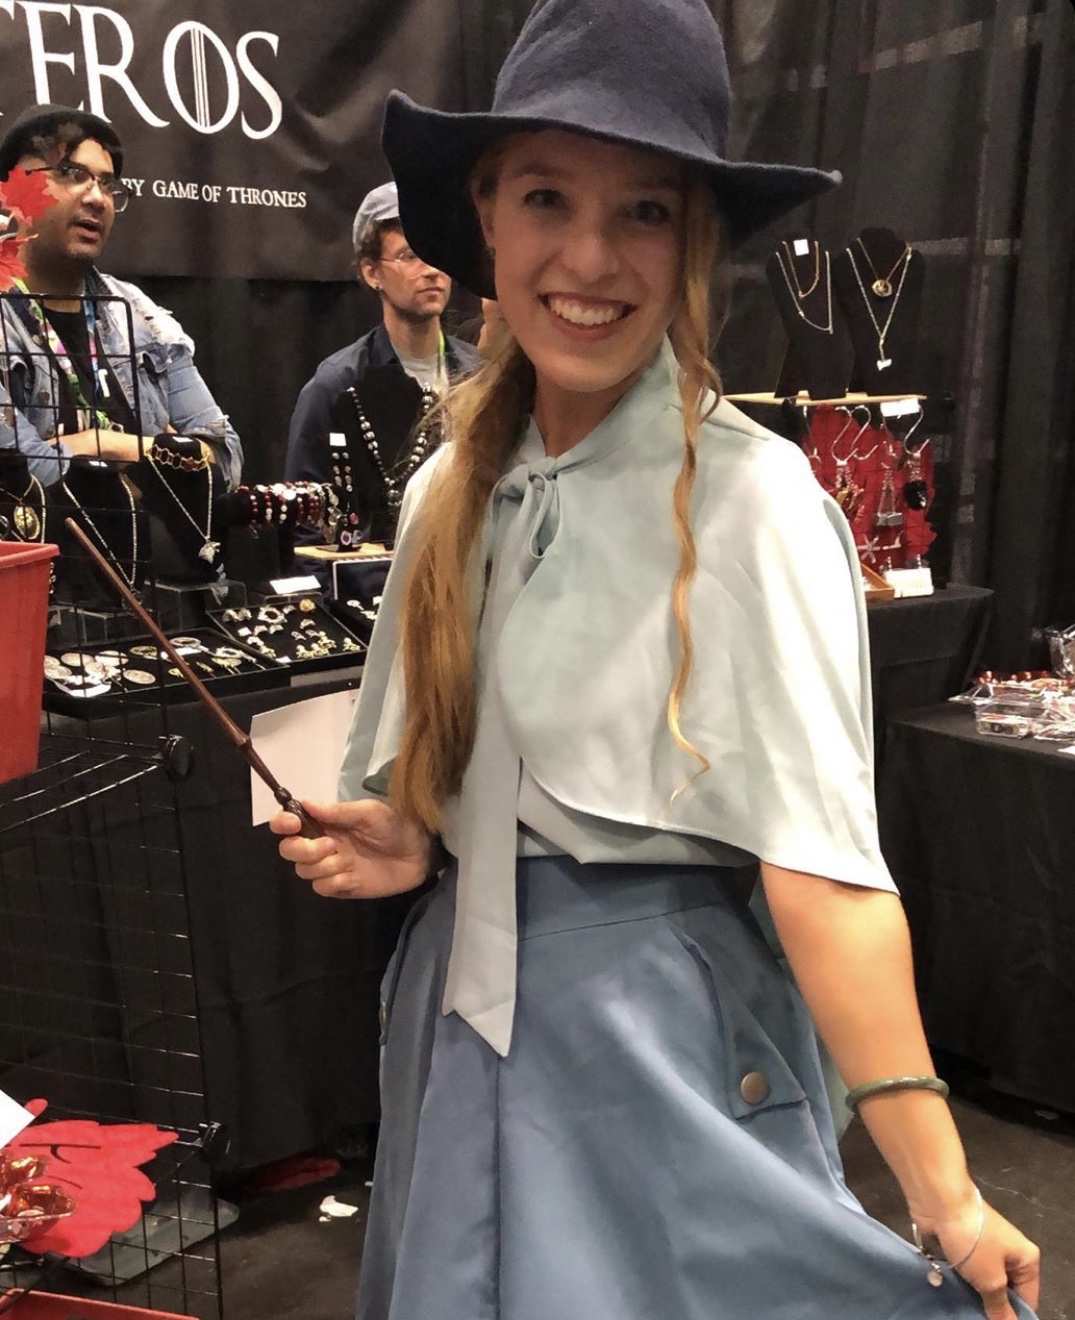 We spotted this fan cosplaying as Fleur Delacour at New York Comic Con.